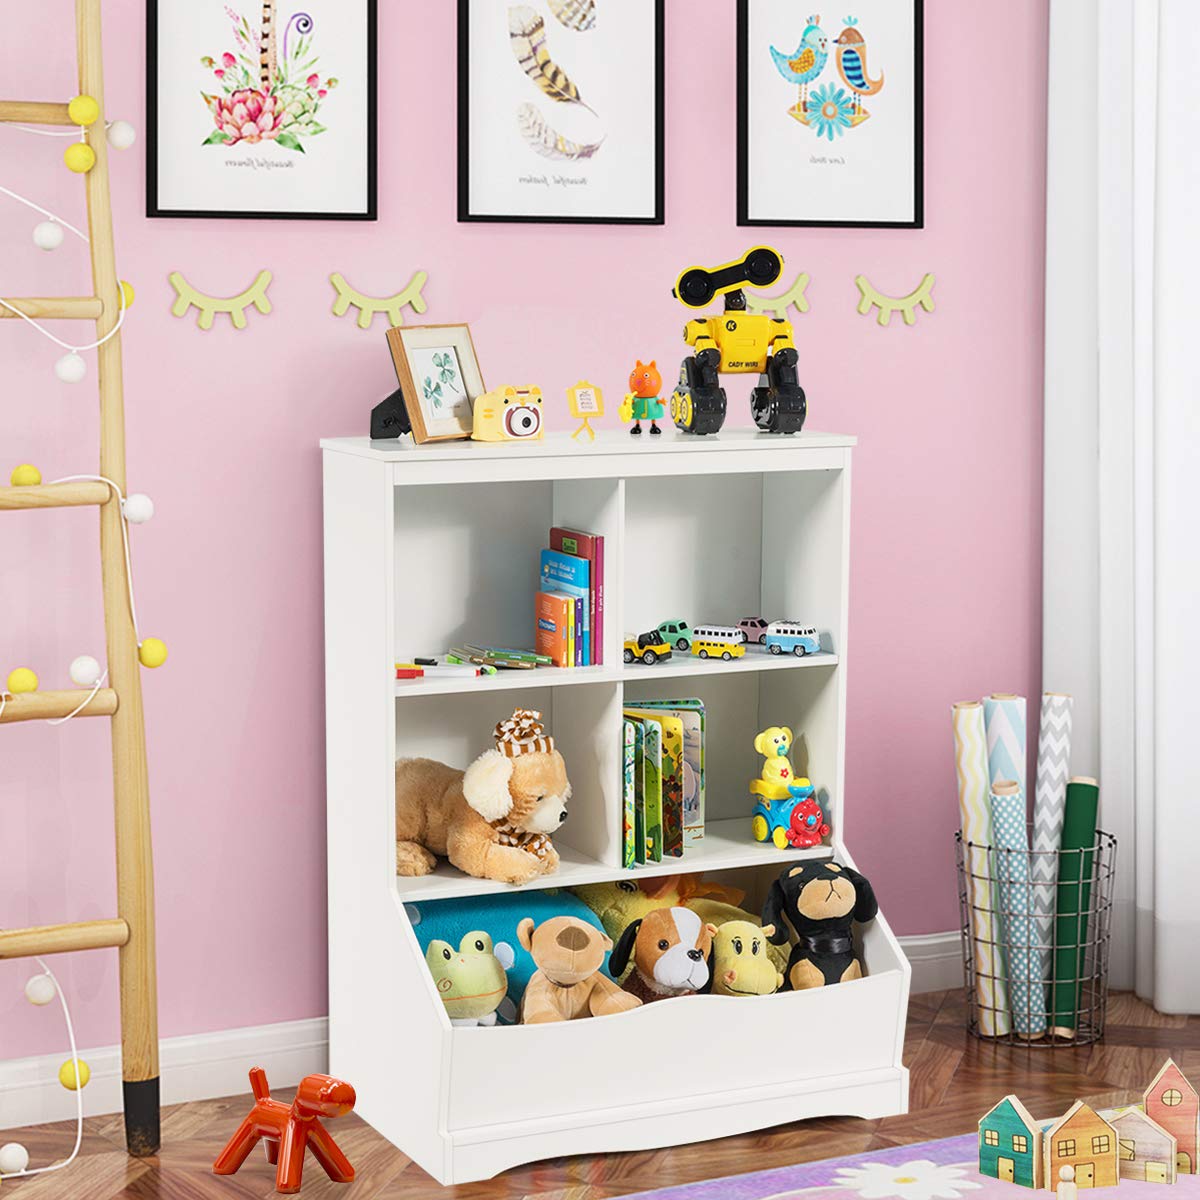 Hikidspace 3-Tier Multi-Functional Kids Bookcase with 5 Toys Storage Boxes